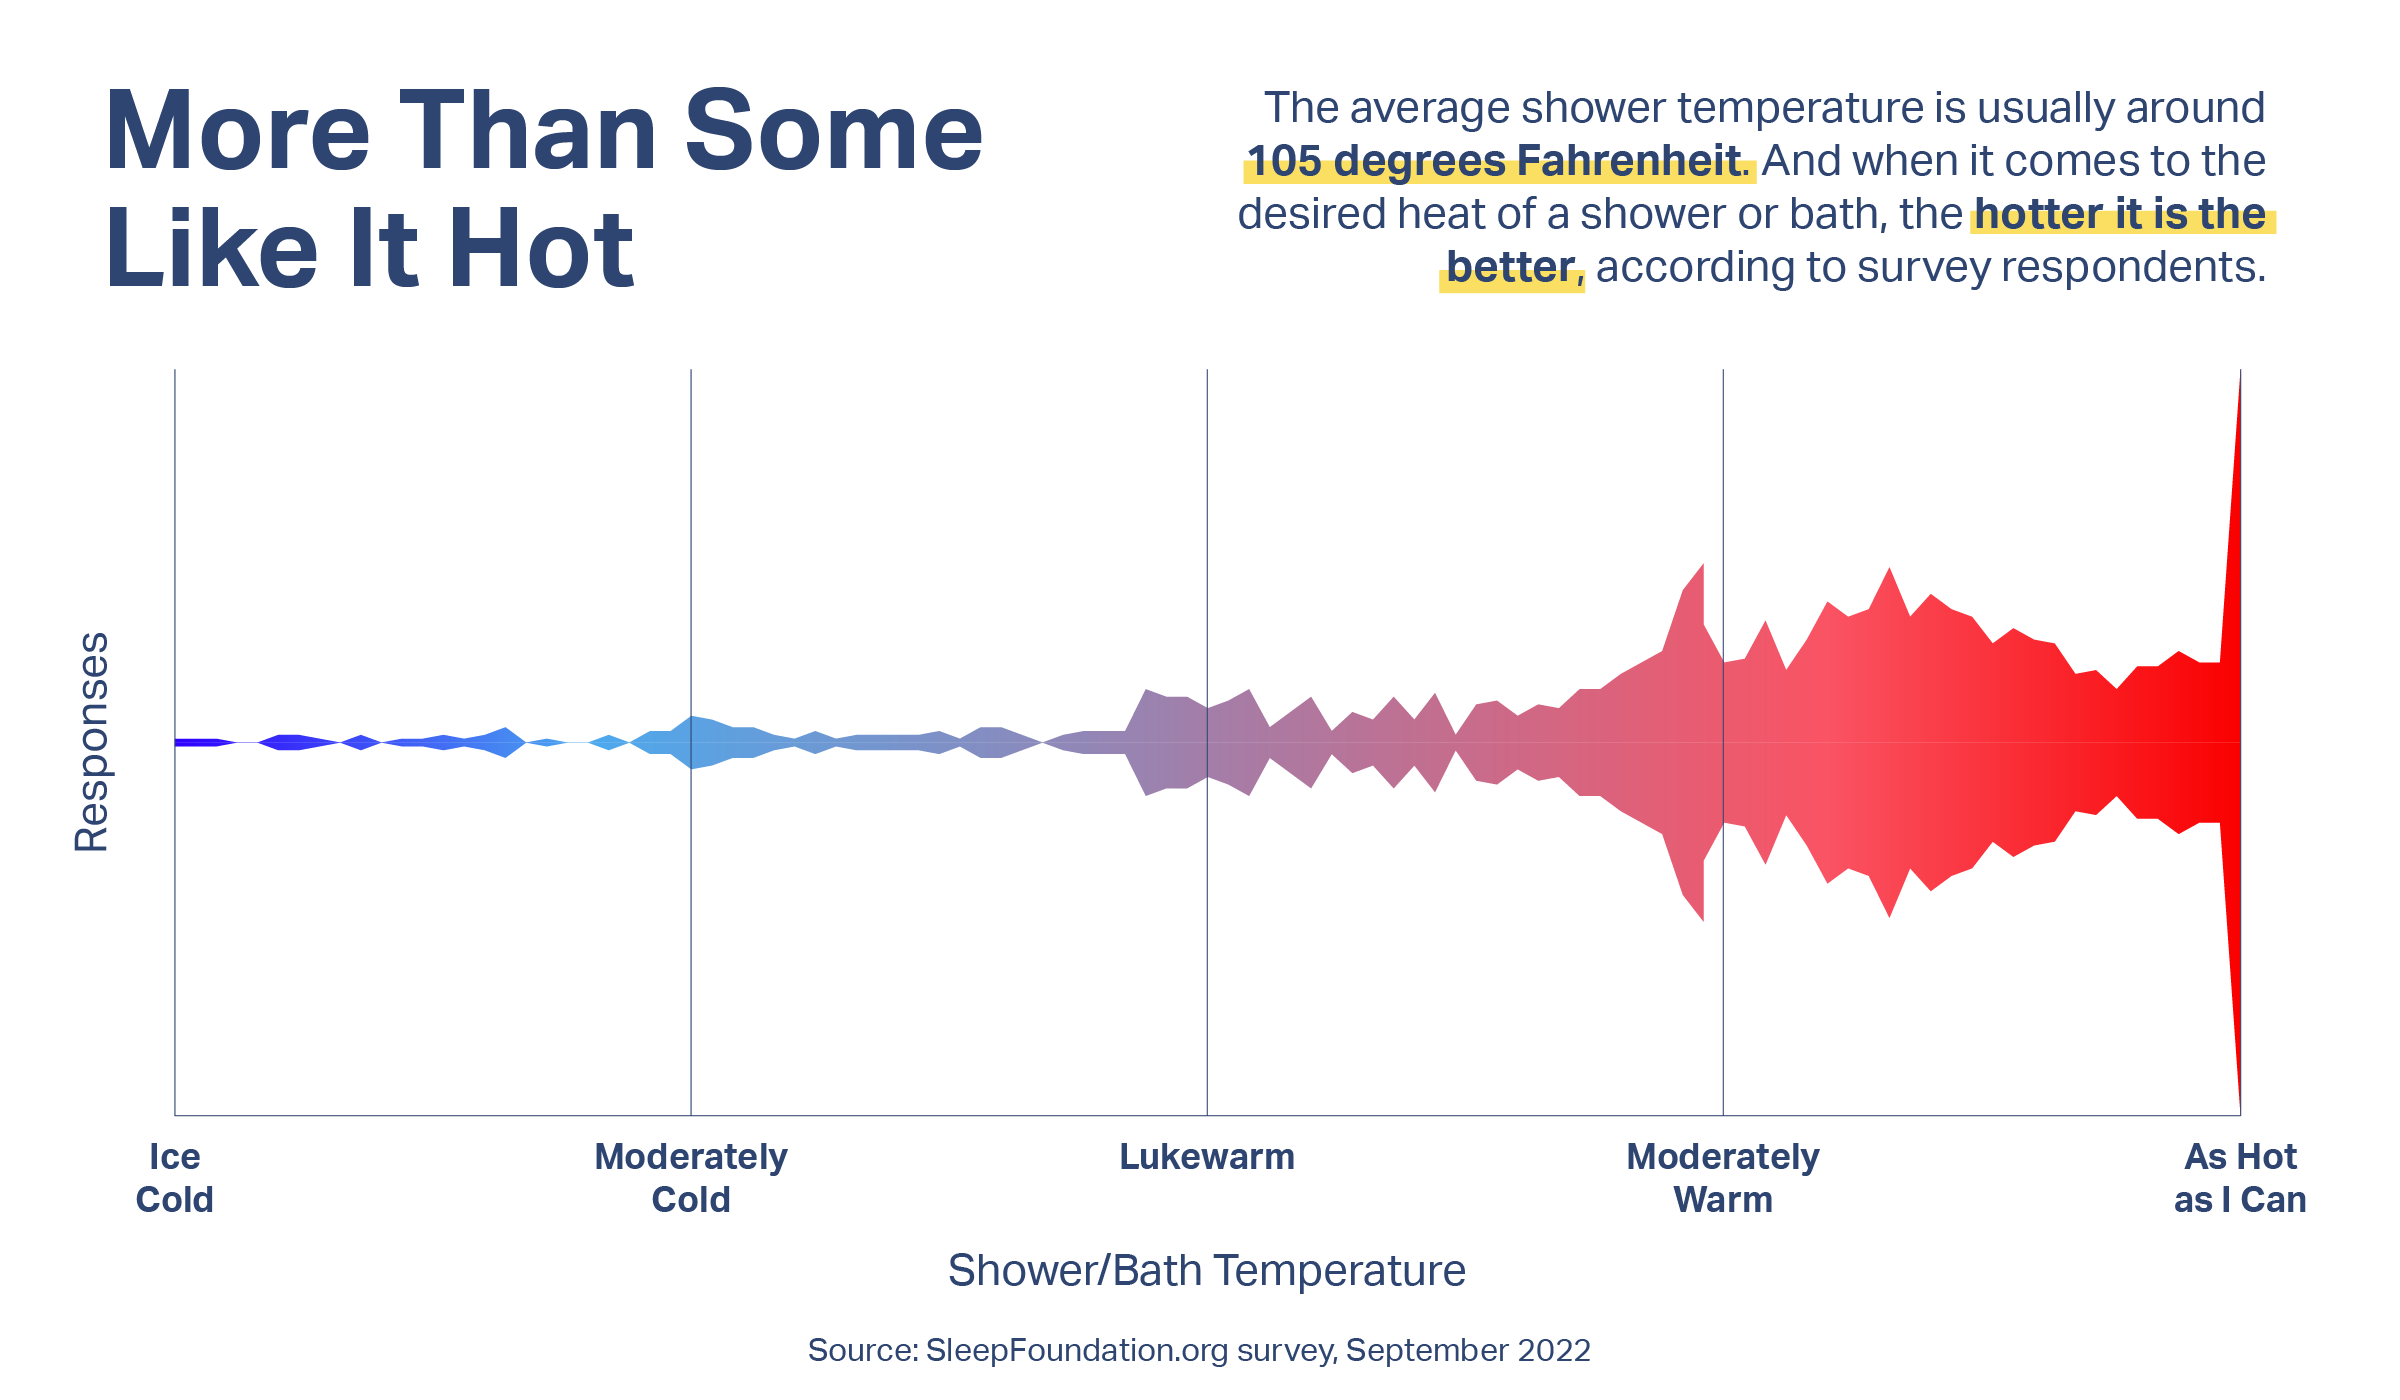 Showers and Sleep: More Than Some Like It Hot